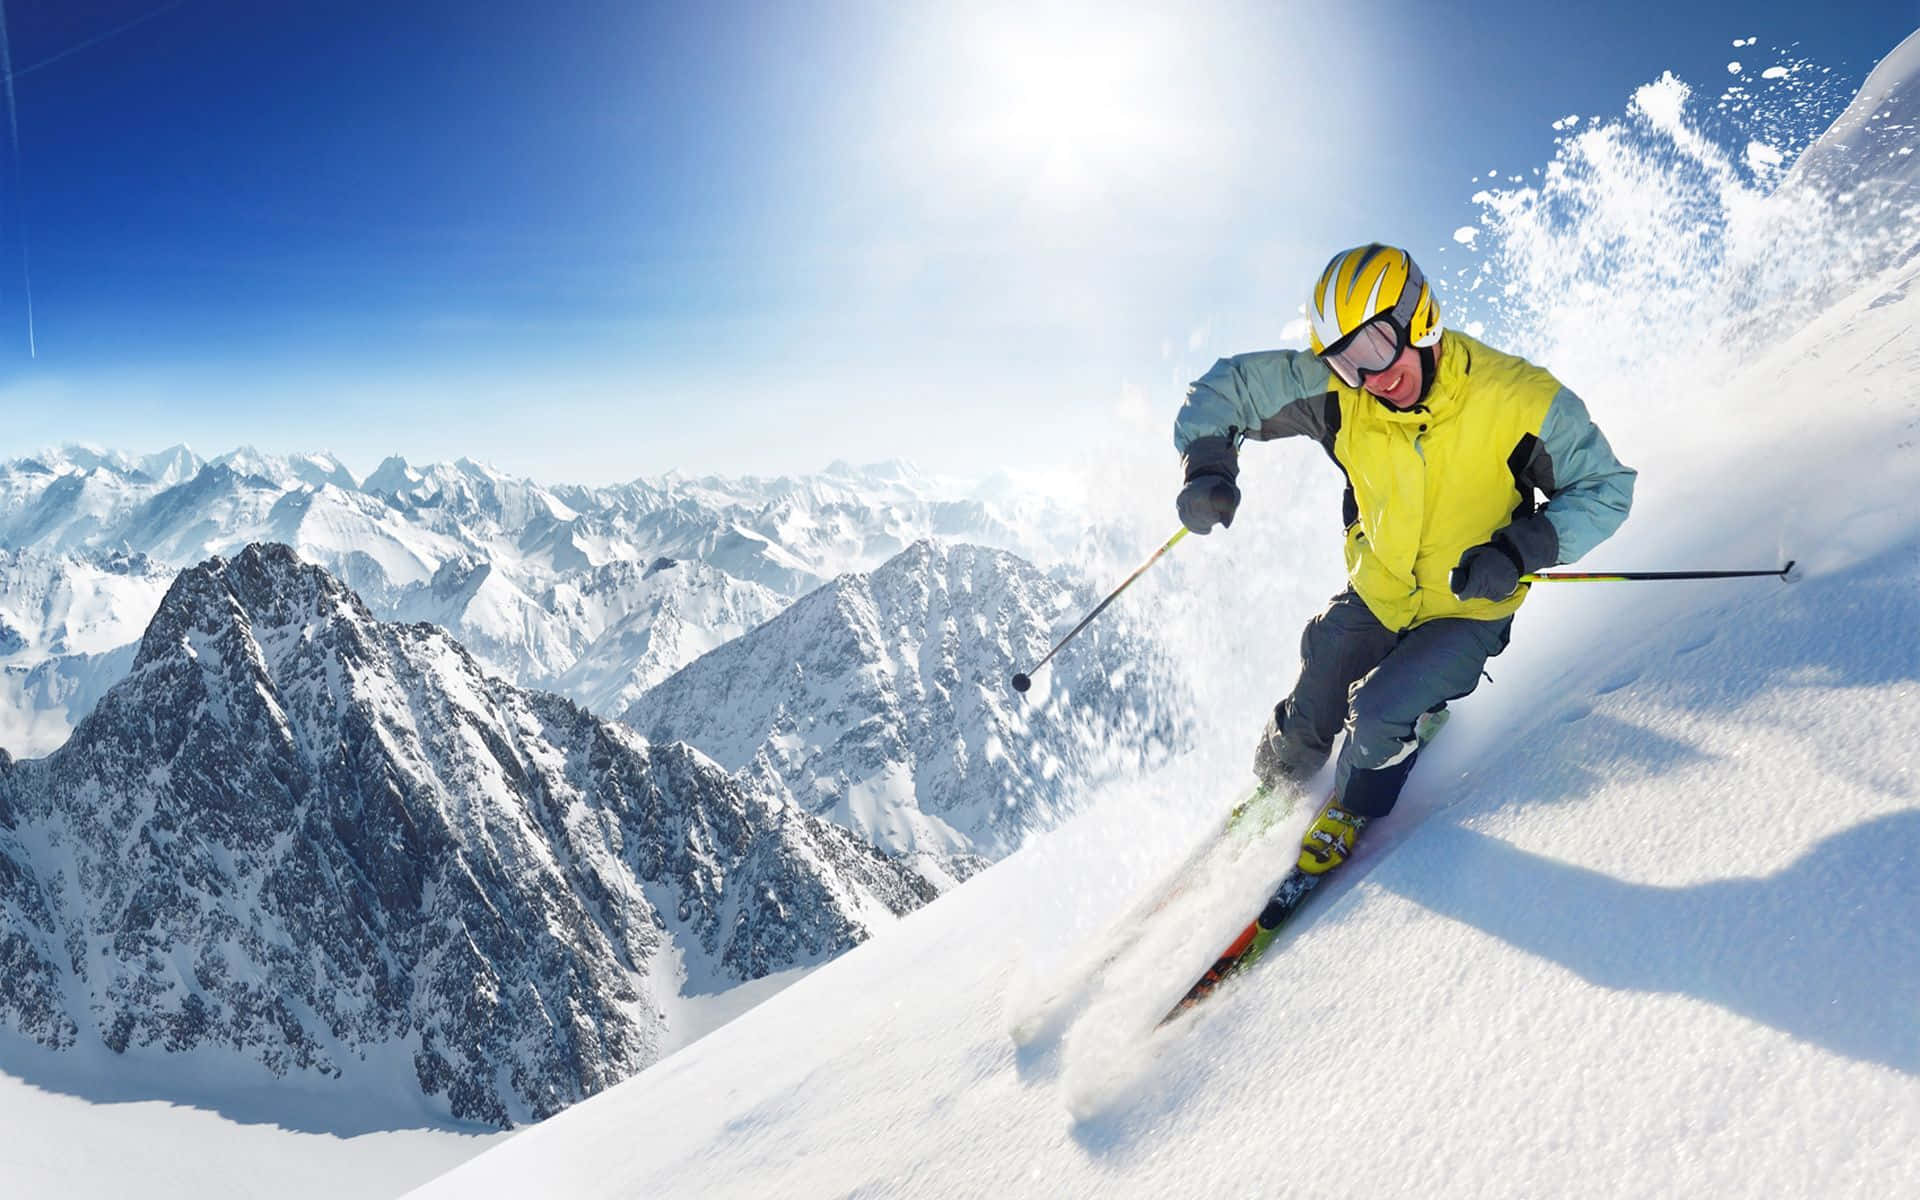 Exhilarating Winter Sports Action Wallpaper